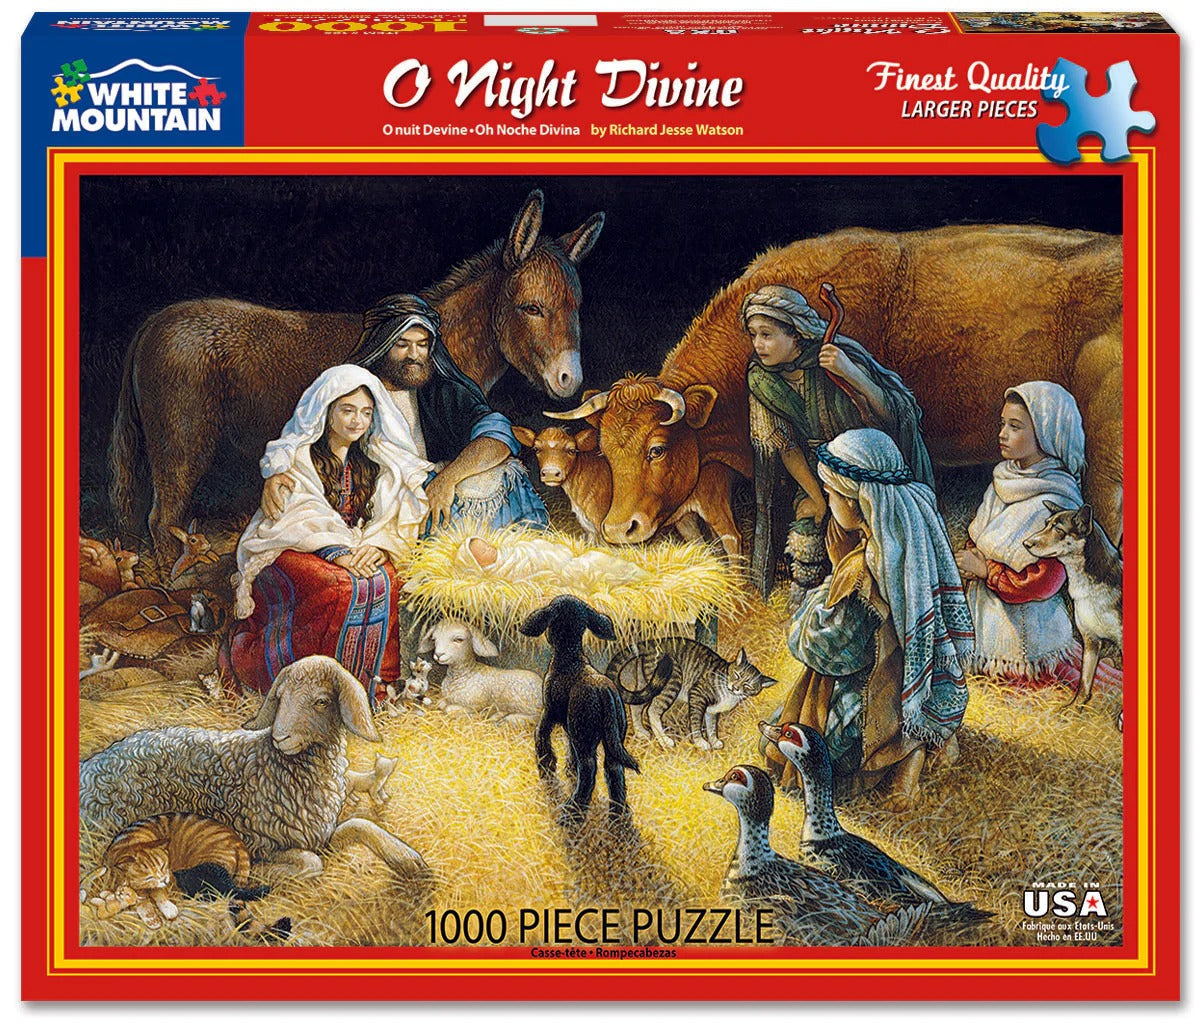 O Night Divine 1000 Piece Jigsaw Puzzle by White Mountain Puzzles